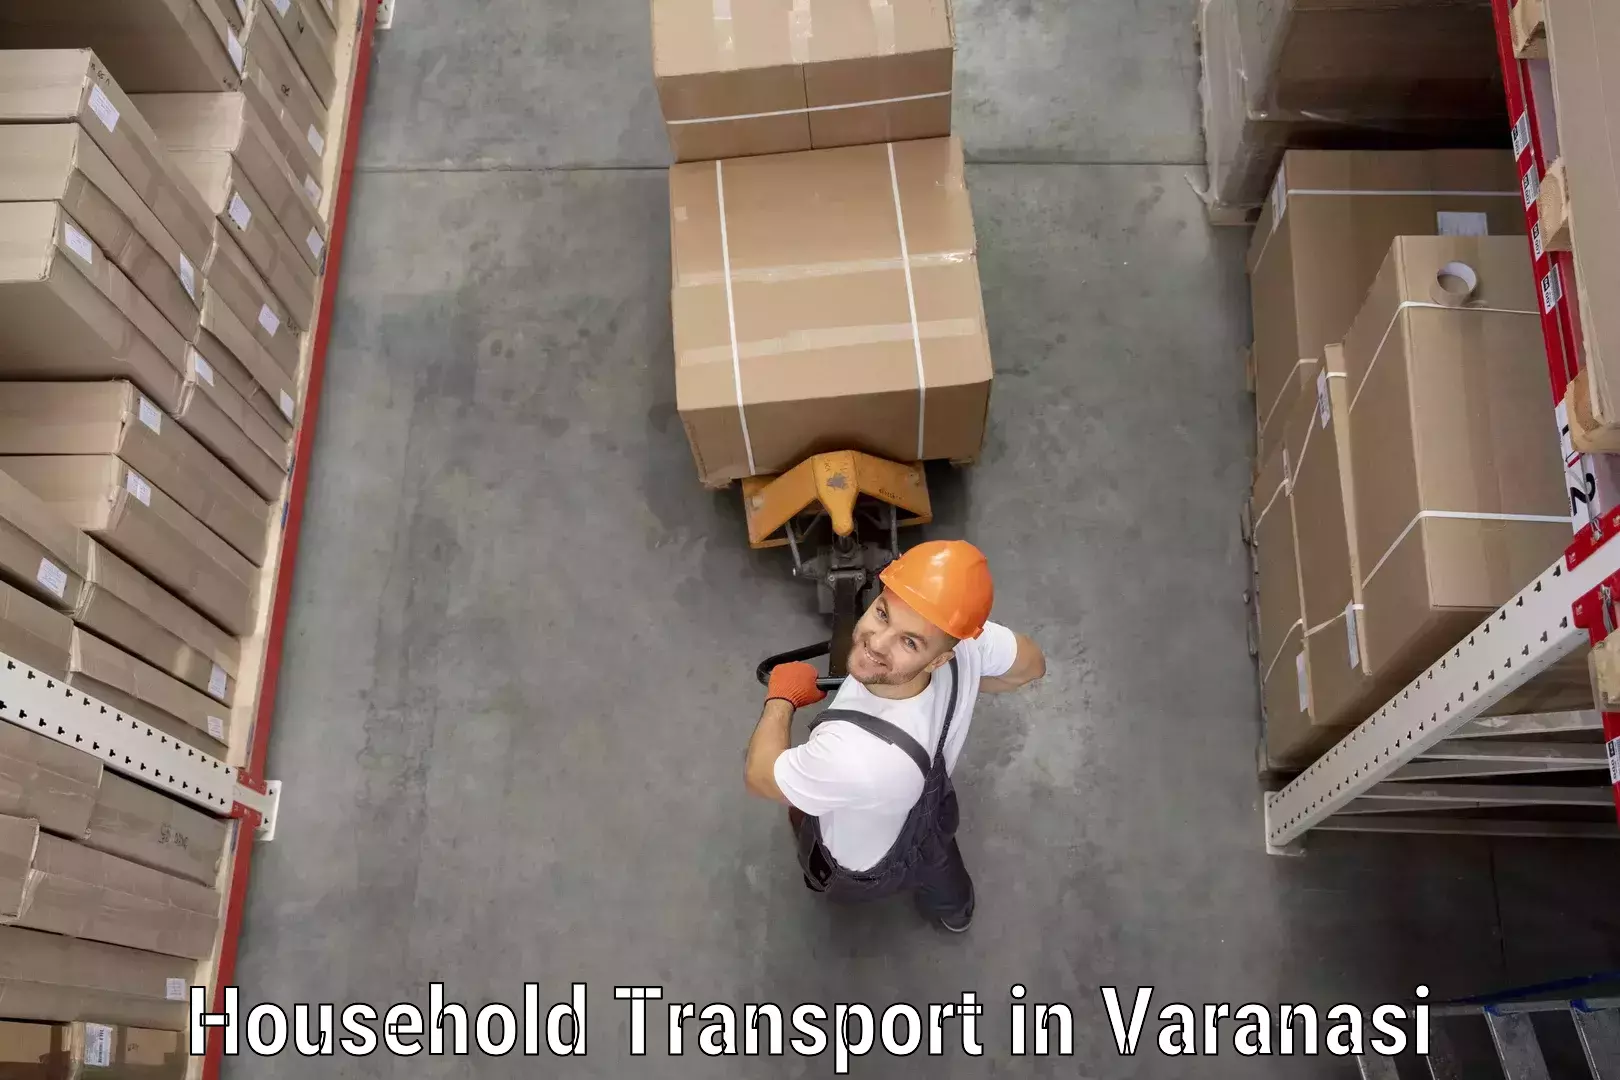 Moving and handling services in Varanasi